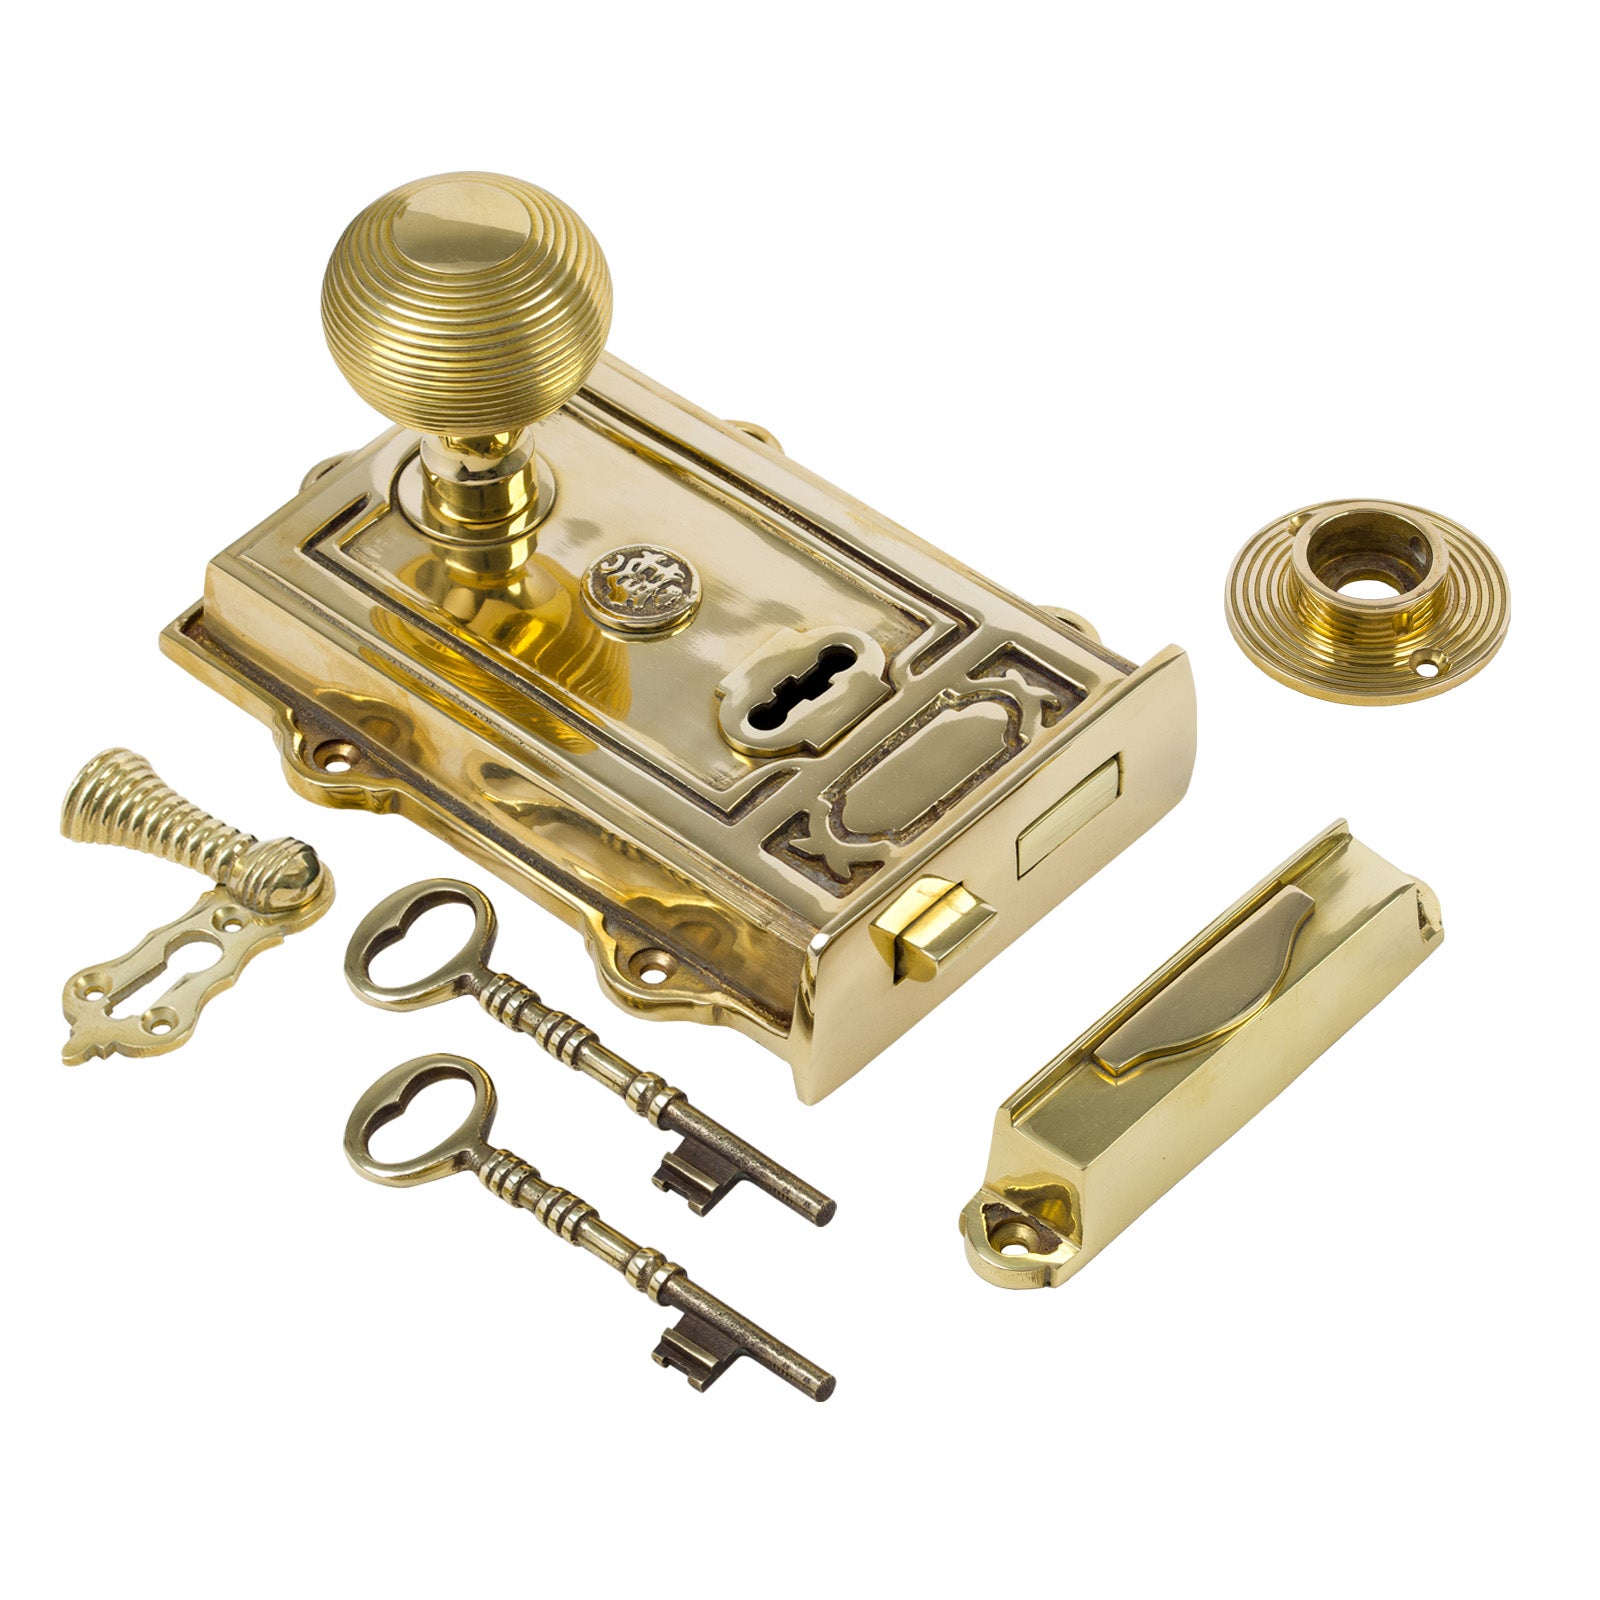 SHOW Image of Ornate Brass Rim Lock with Brass Beehive Door Knob Set - Polished Brass